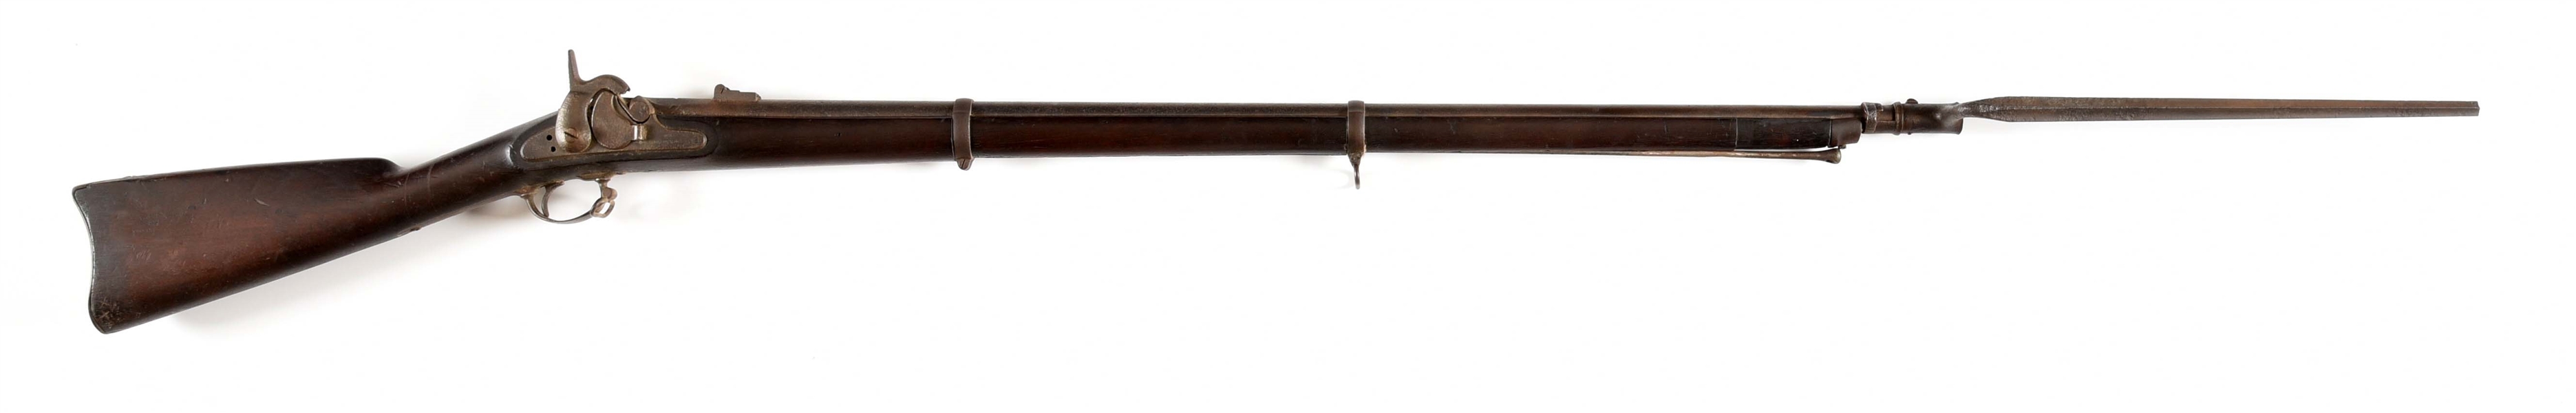 (A HARPERS FERRY PERCUSSION SMOOTHBORE RIFLE 